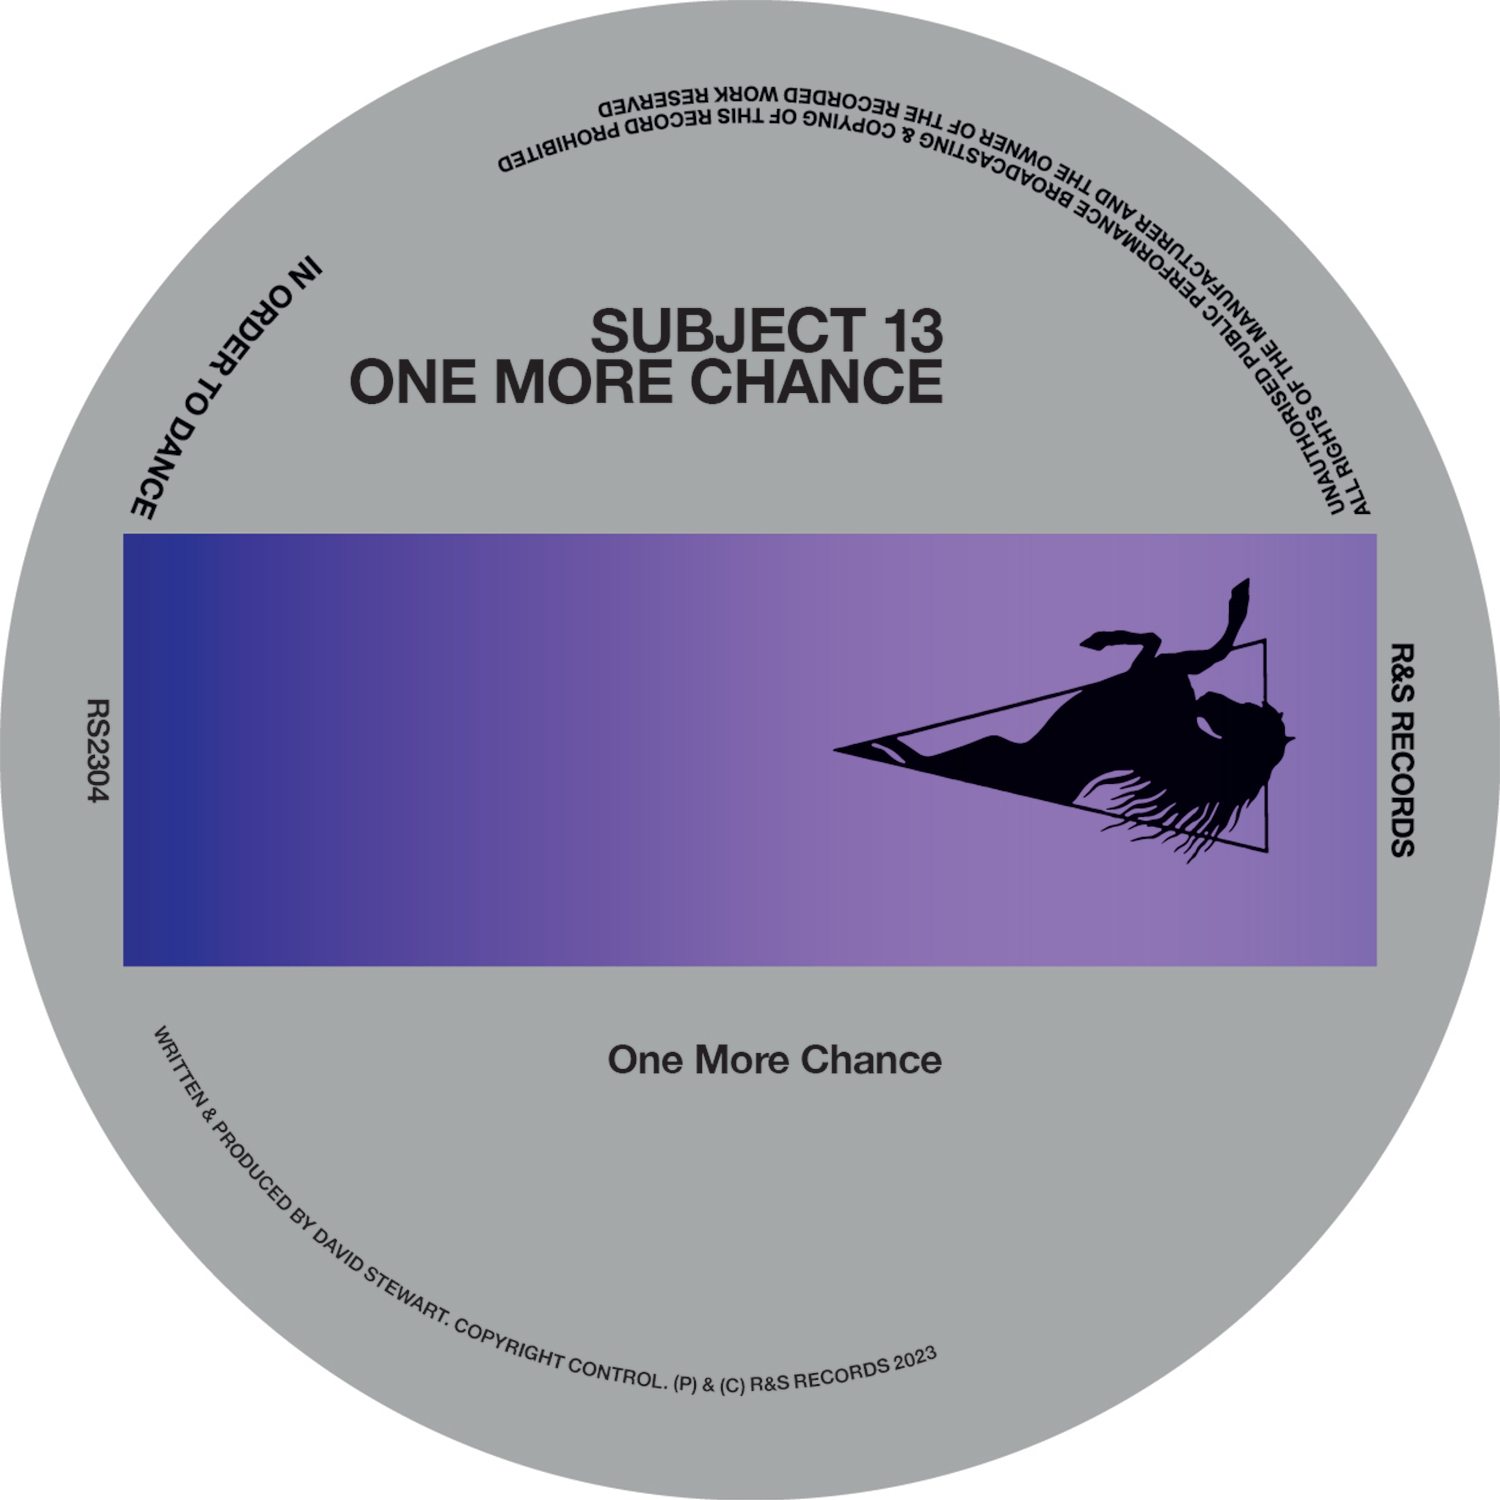 Subject 13 – One More Chance – R&S Records